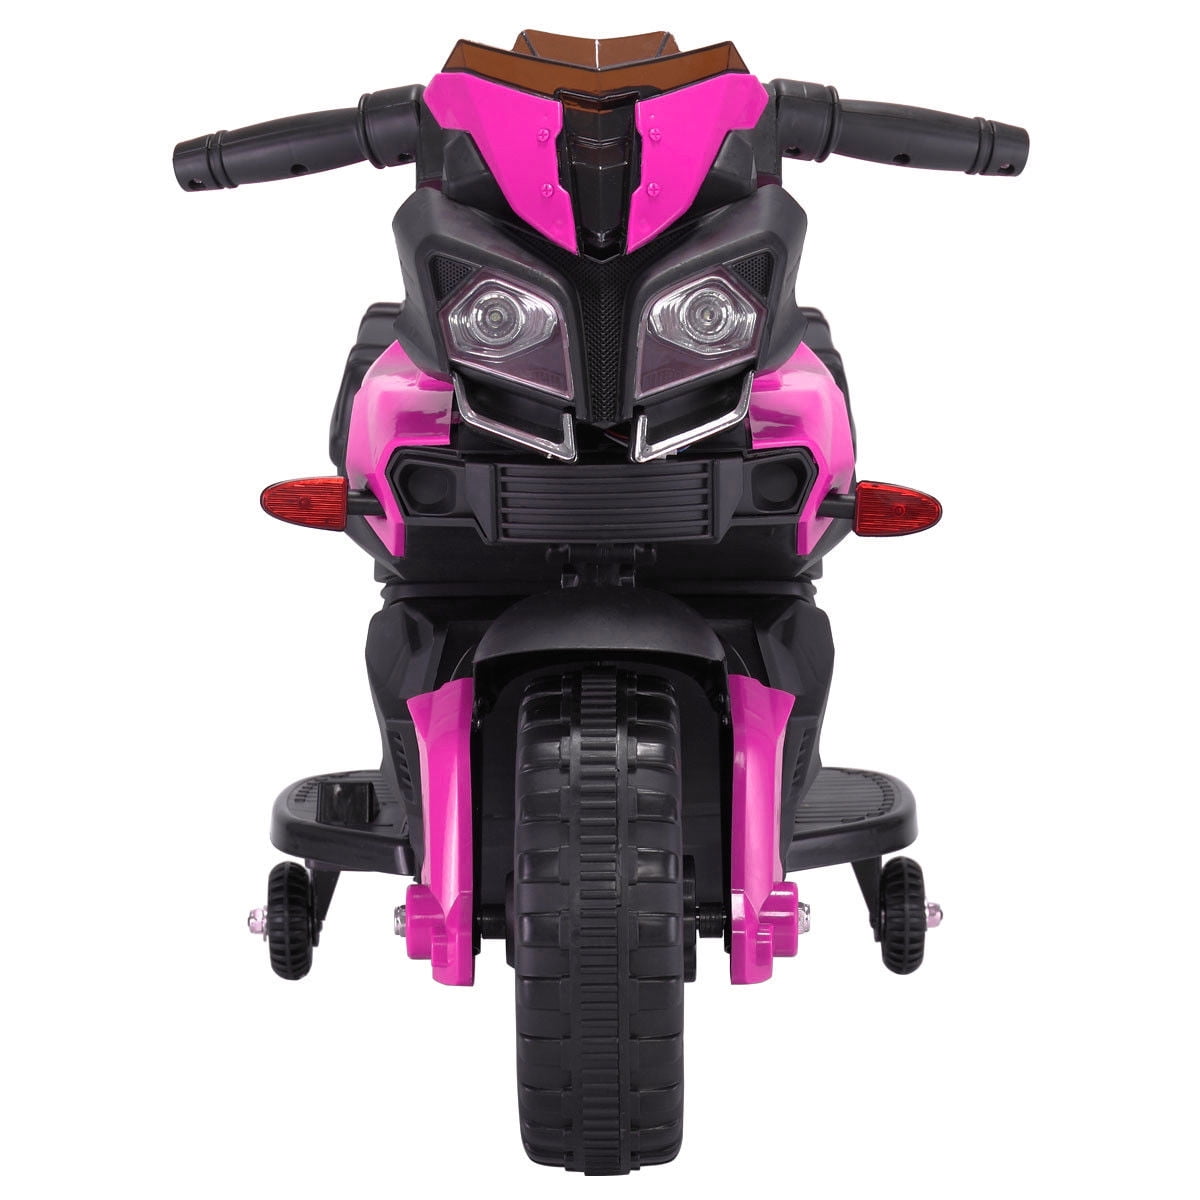 Lowestbest Kids Electric Battery-Powered Ride-On Motorcycle Dirt Bike Toy With 4 Wheels, Gifts for Children Girls Boys, Pink